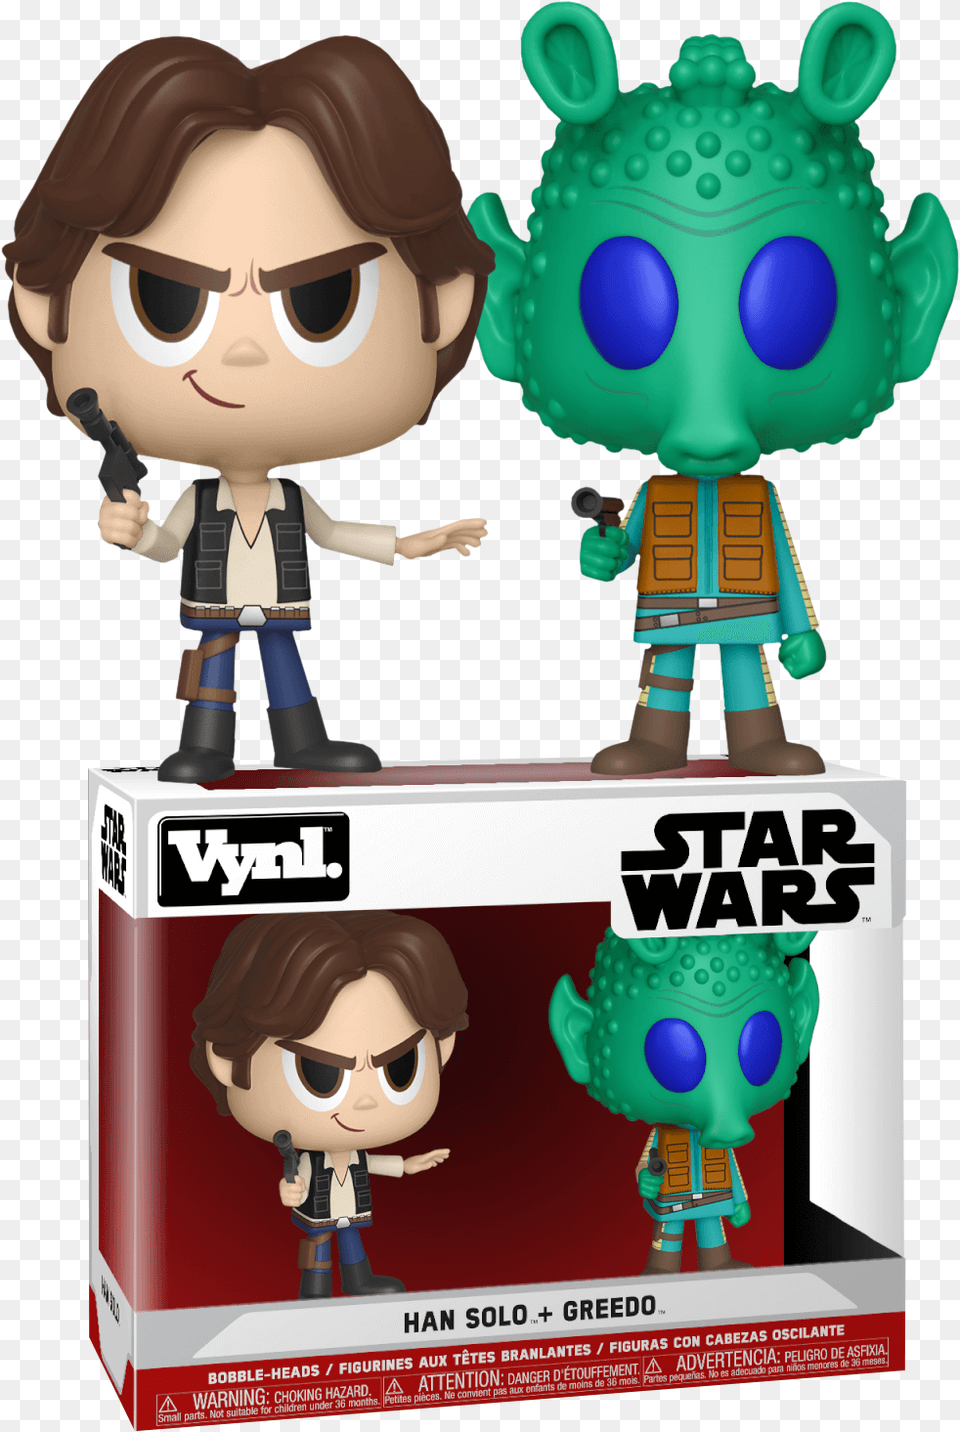 Han Solo Amp Greedo Vynl Vynl Han Solo Greedo, Toy, Baby, Person, Face Png